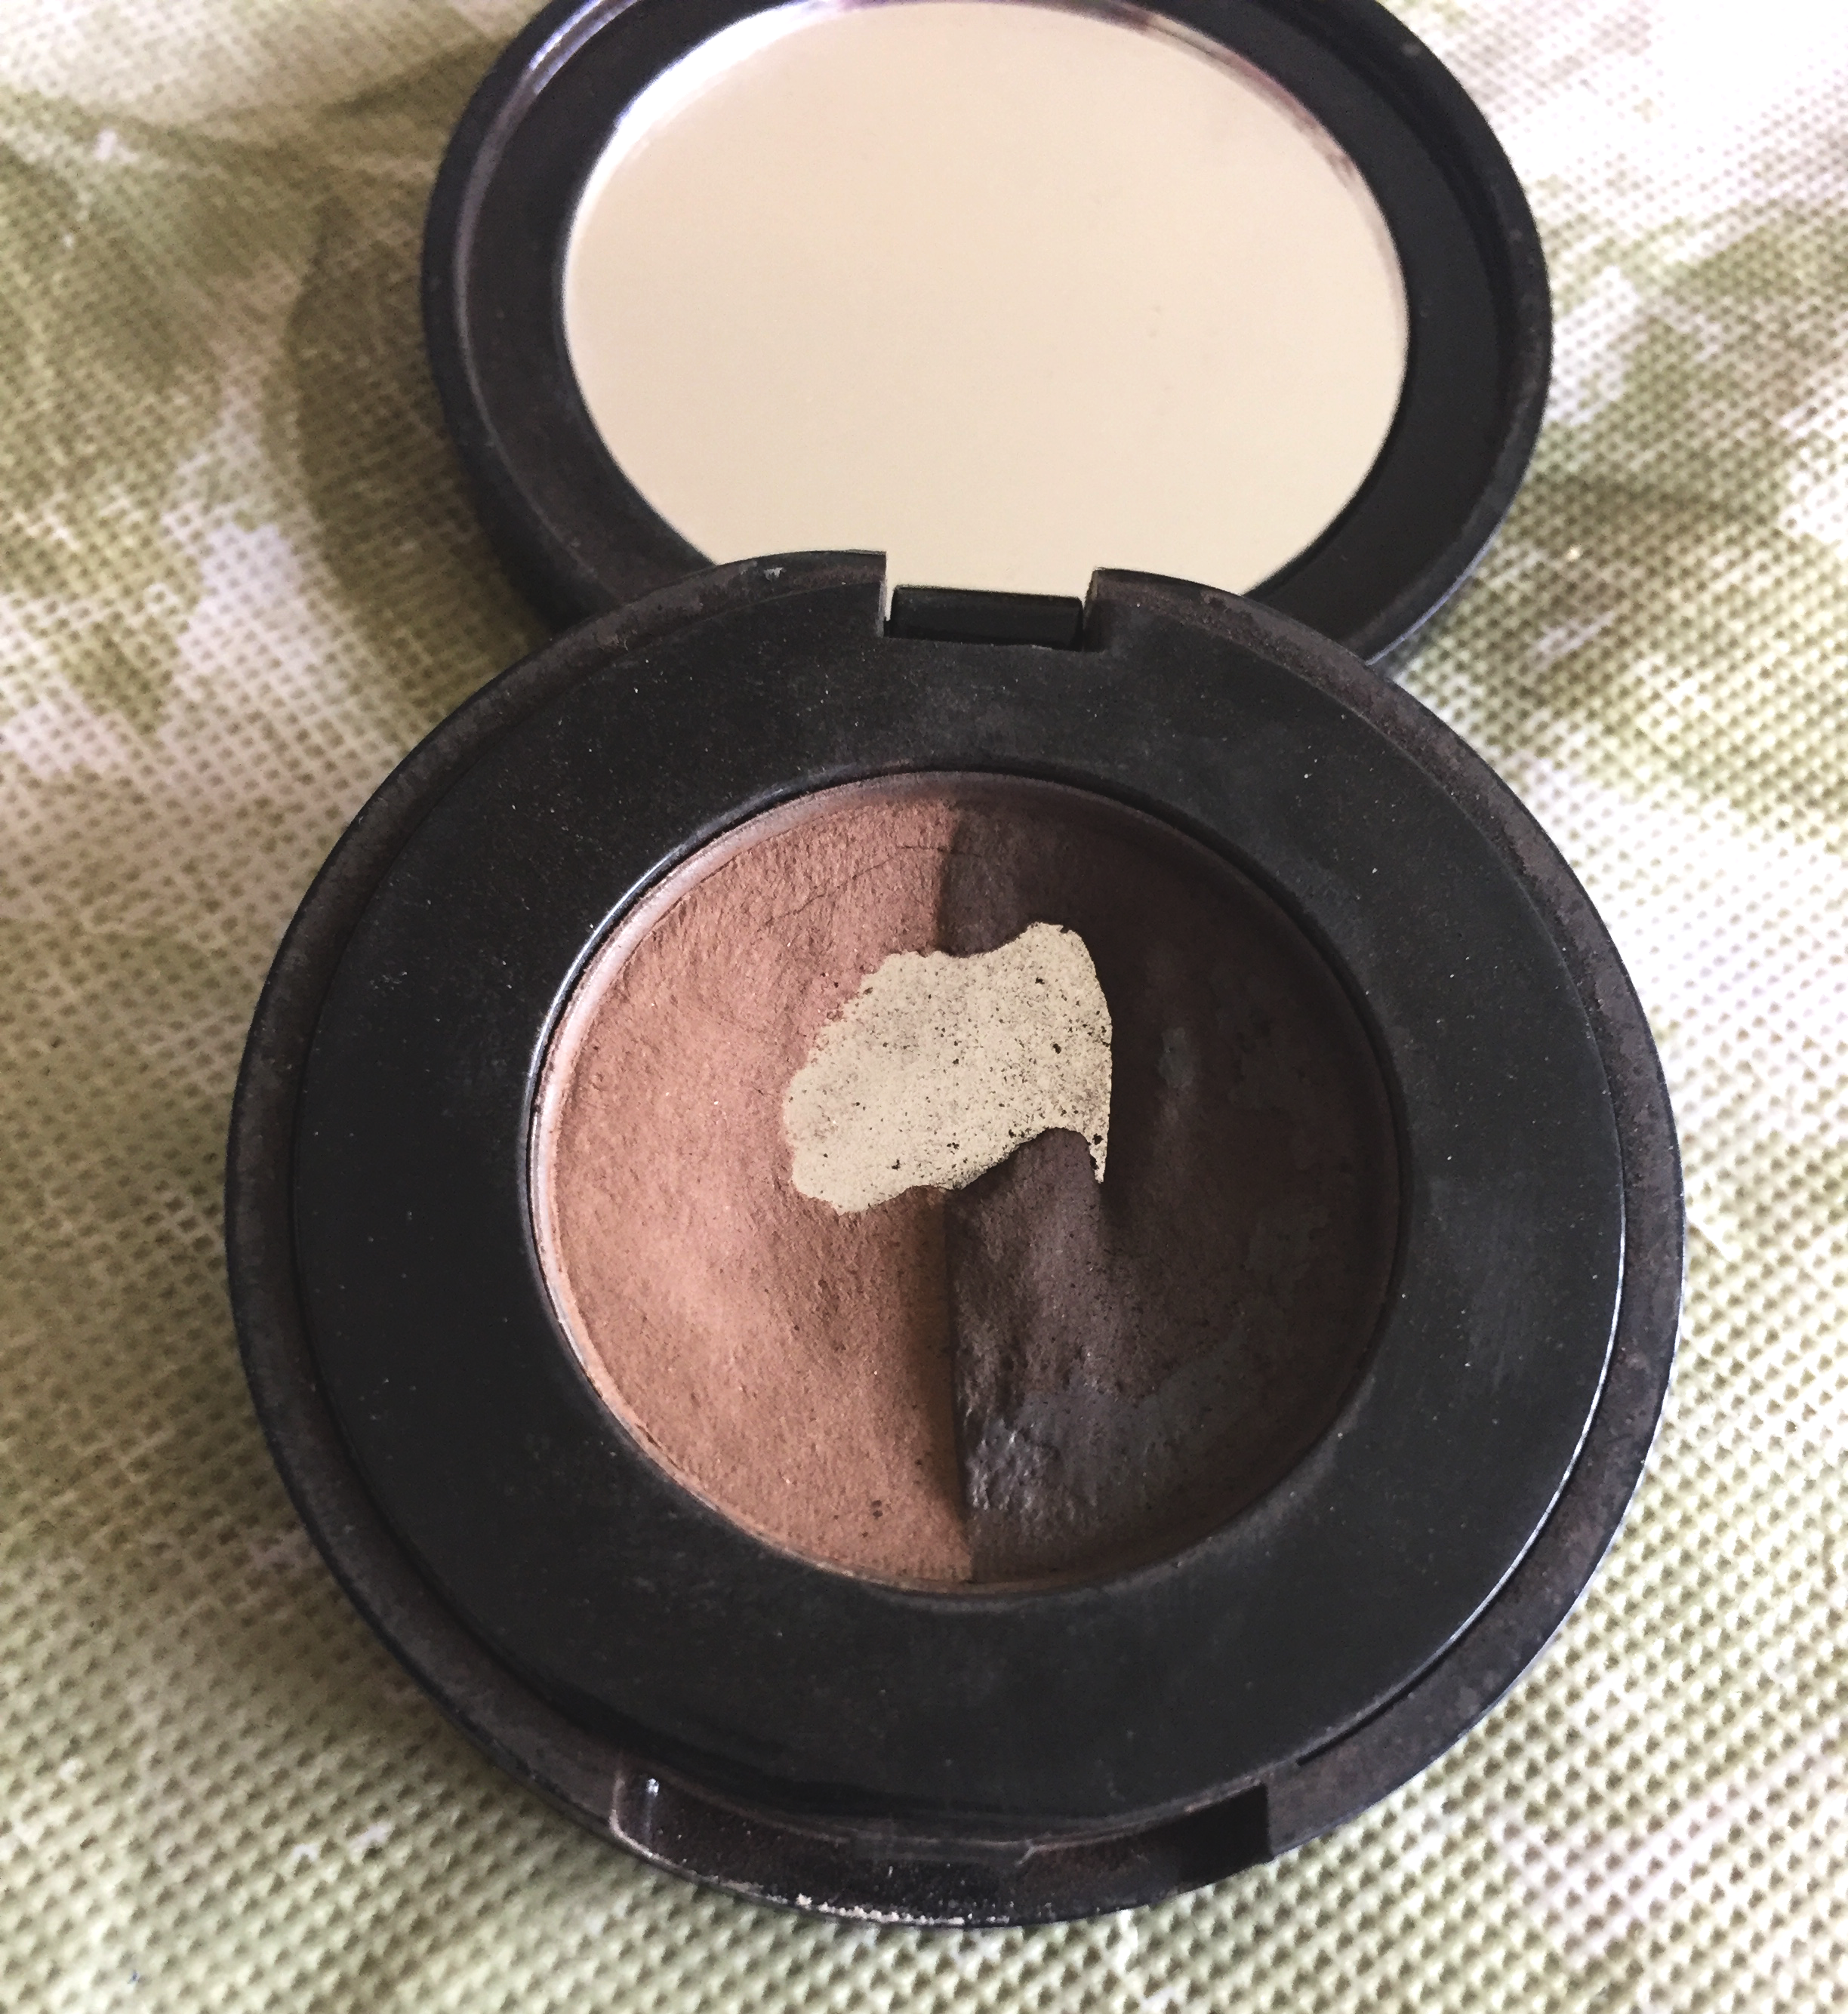 My 4 year old eyebrow powder that I finally hit pan on.